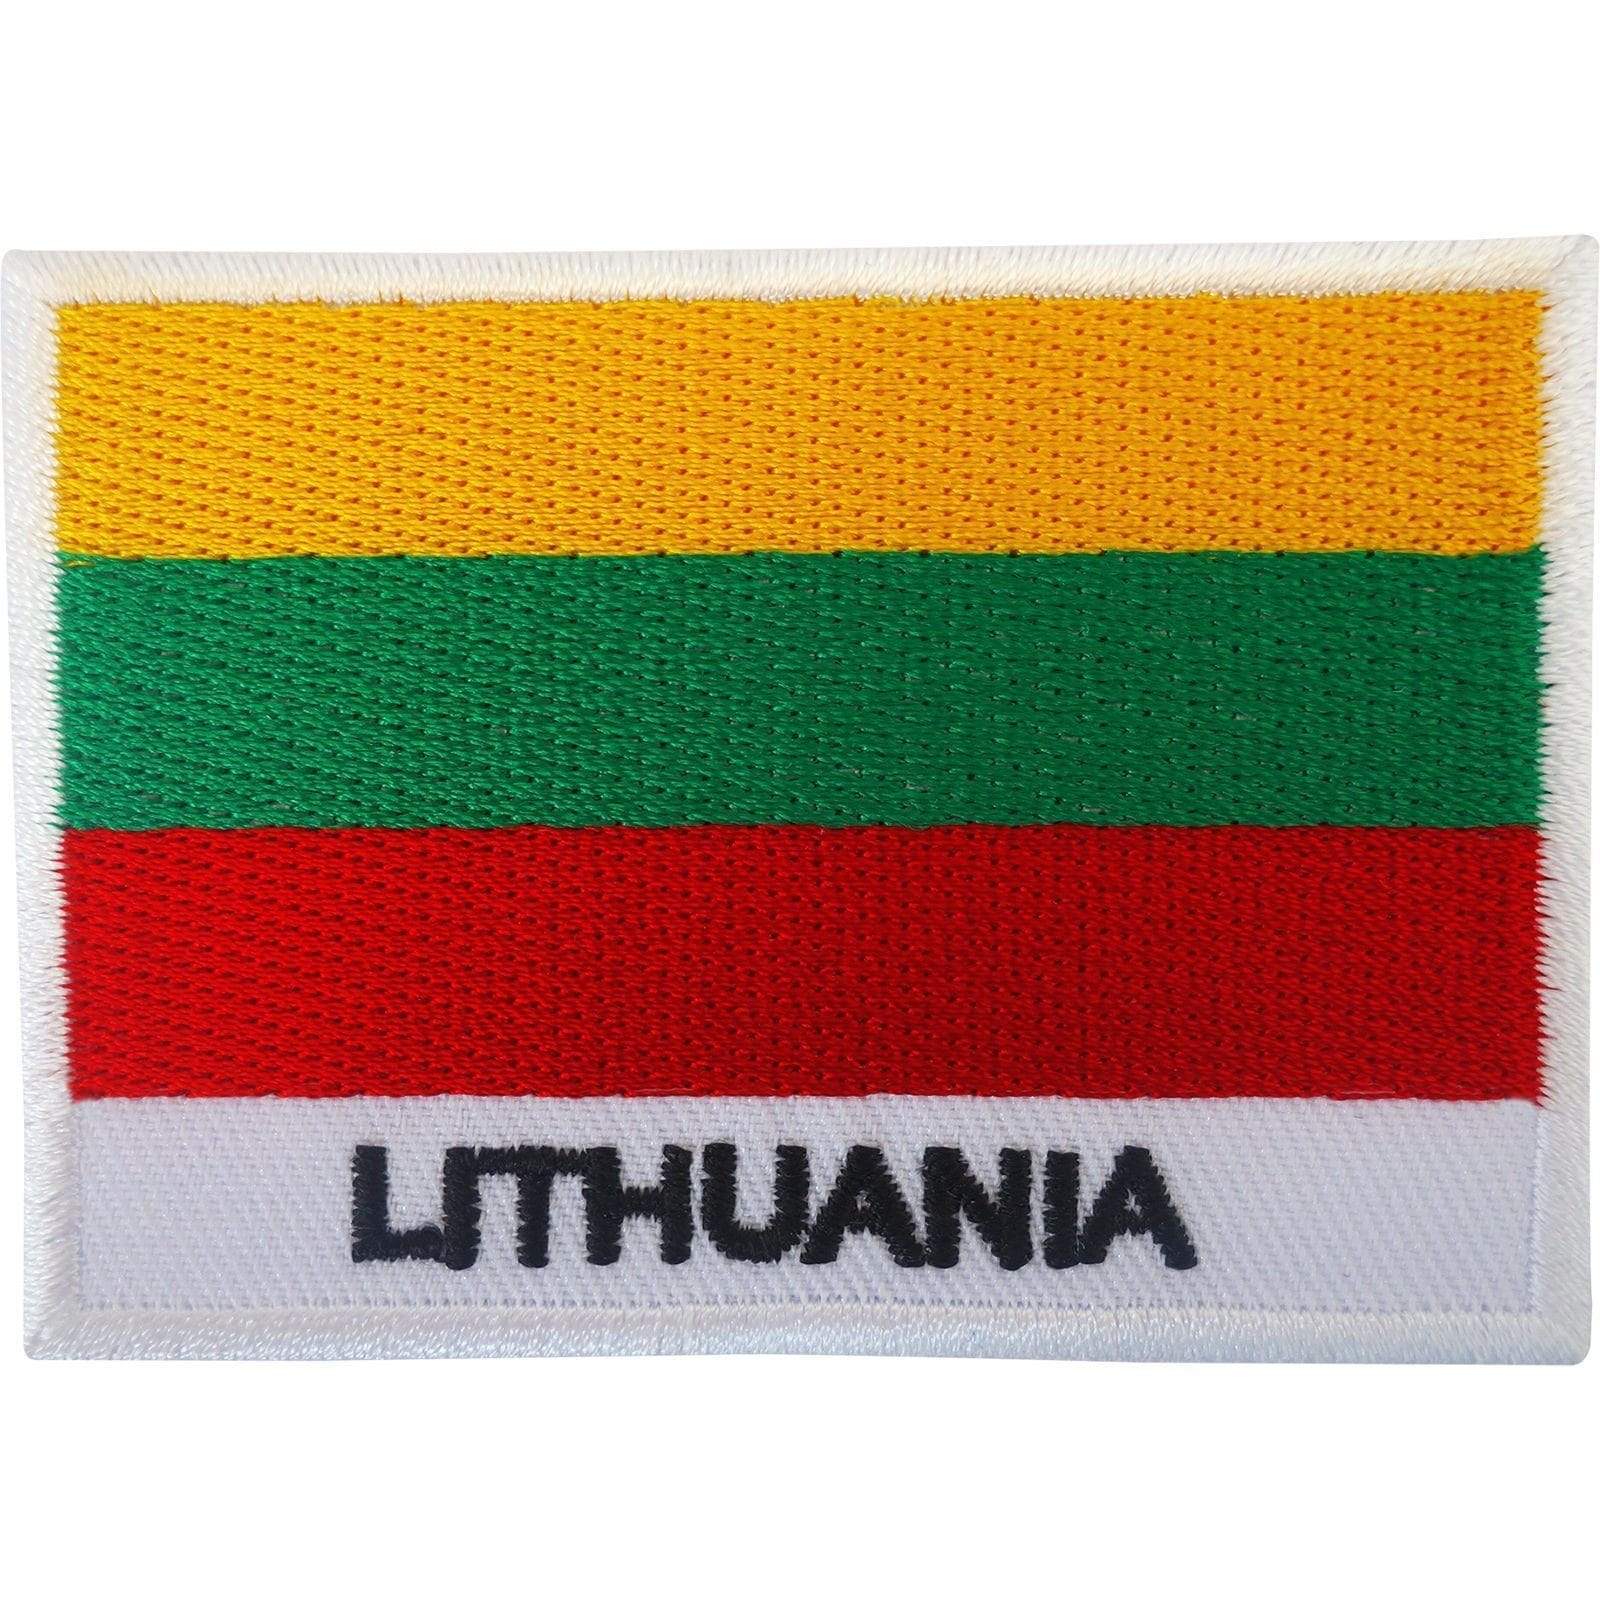 Lithuania Flag Patch Iron On Badge / Sew On Lithuanian Flag Embroidered Applique